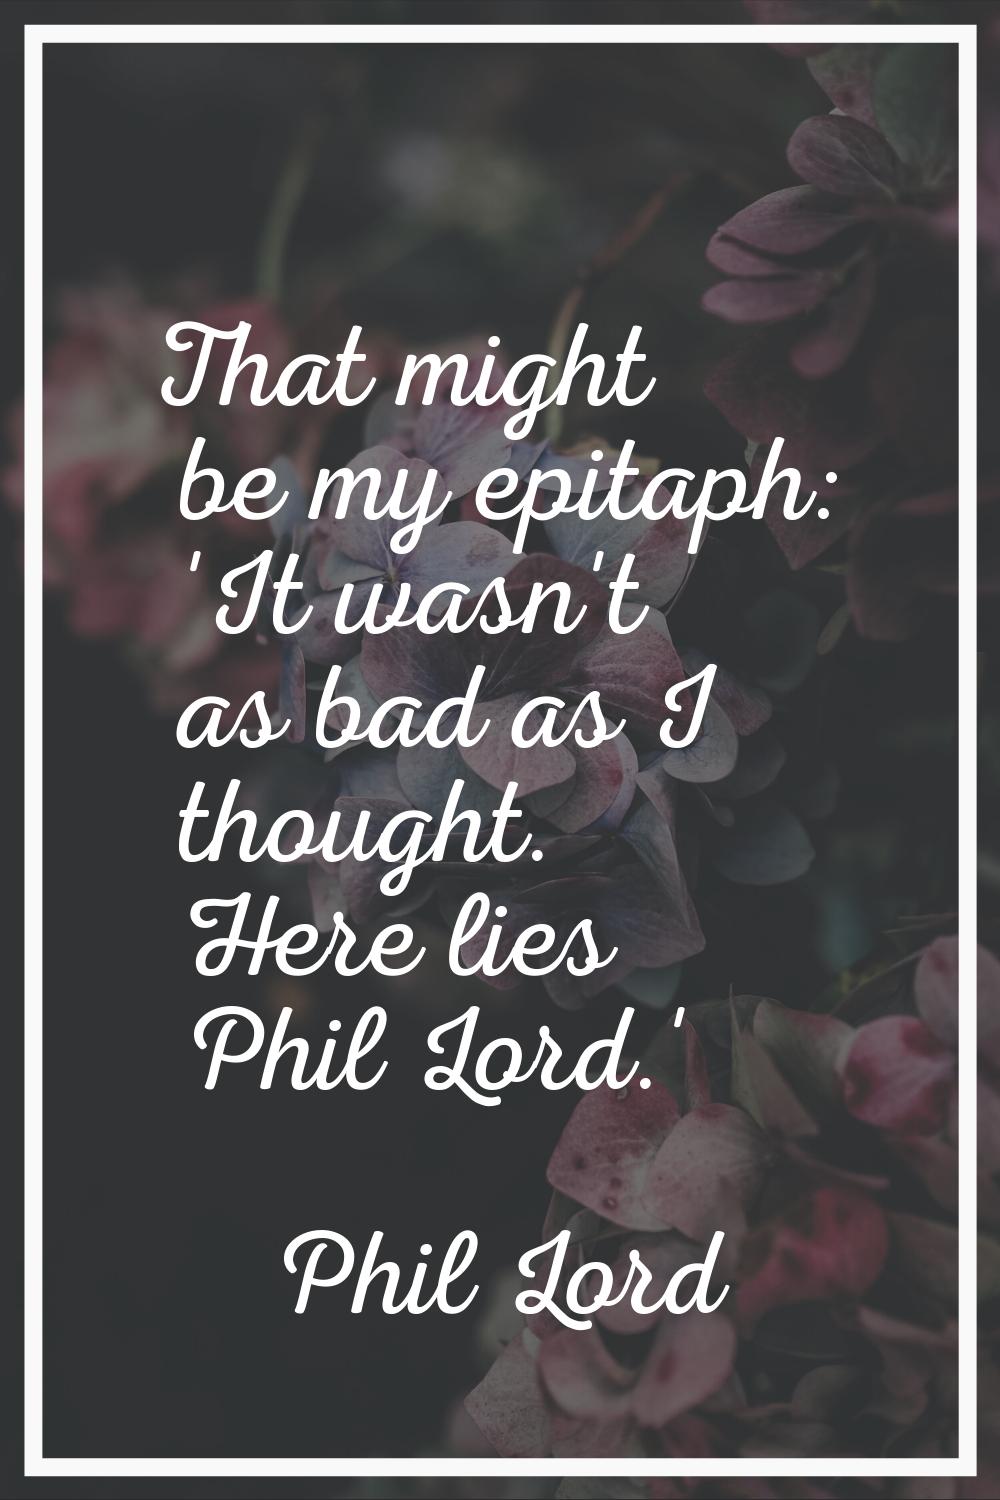 That might be my epitaph: 'It wasn't as bad as I thought. Here lies Phil Lord.'